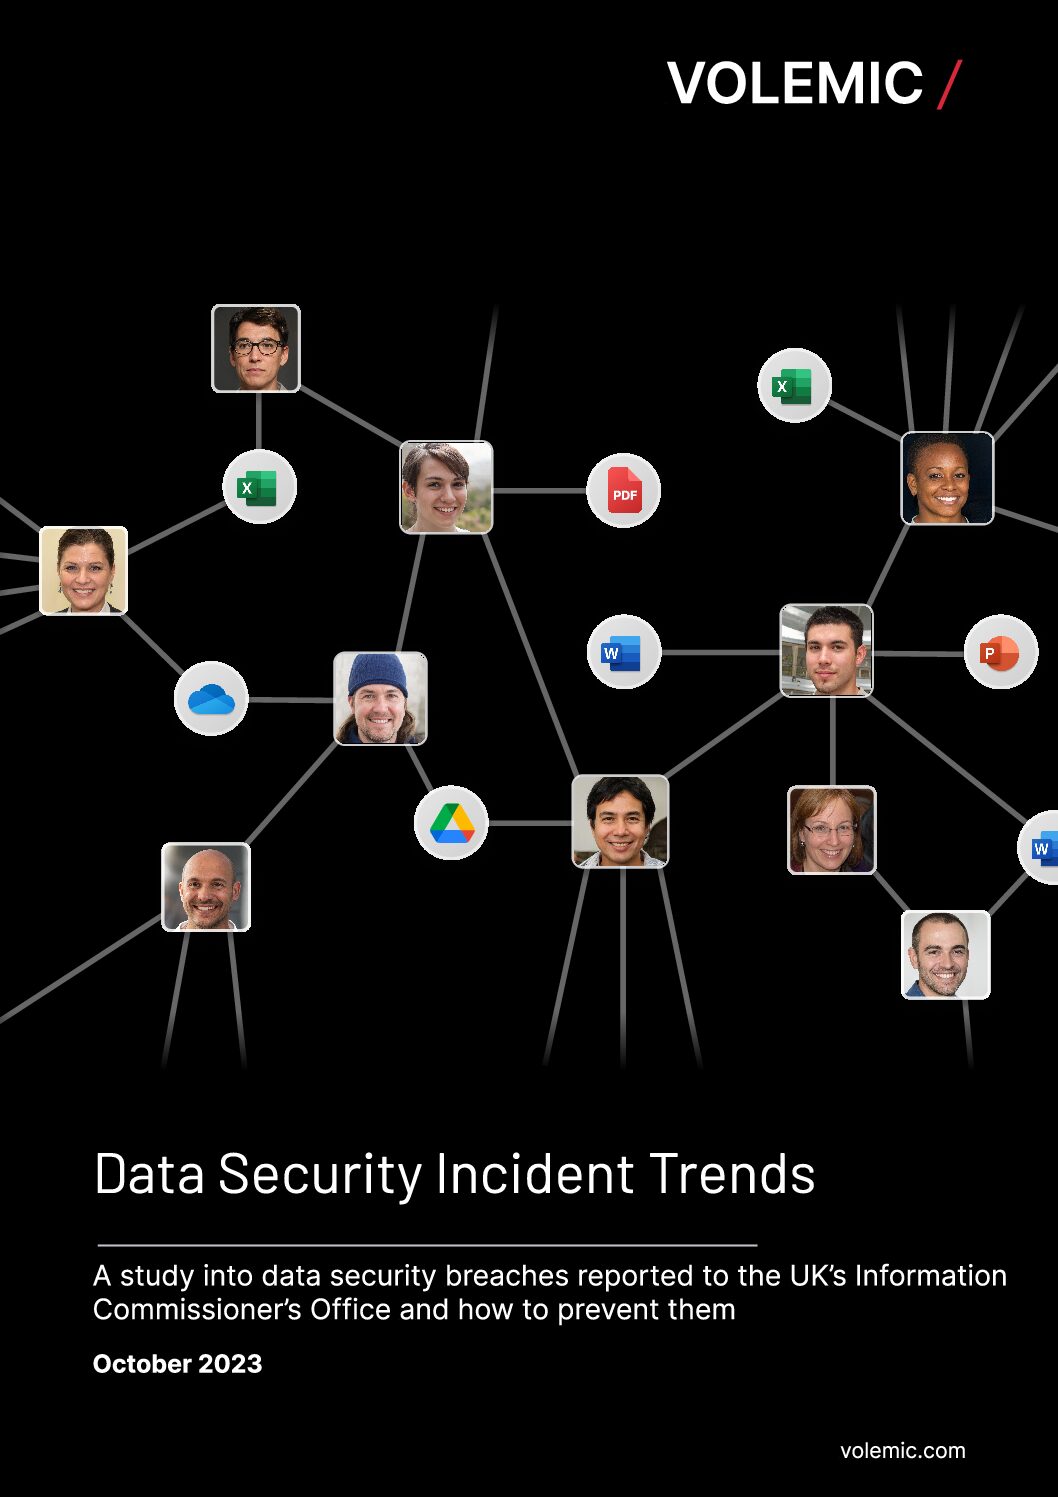 Data Security Incident Trends 2023